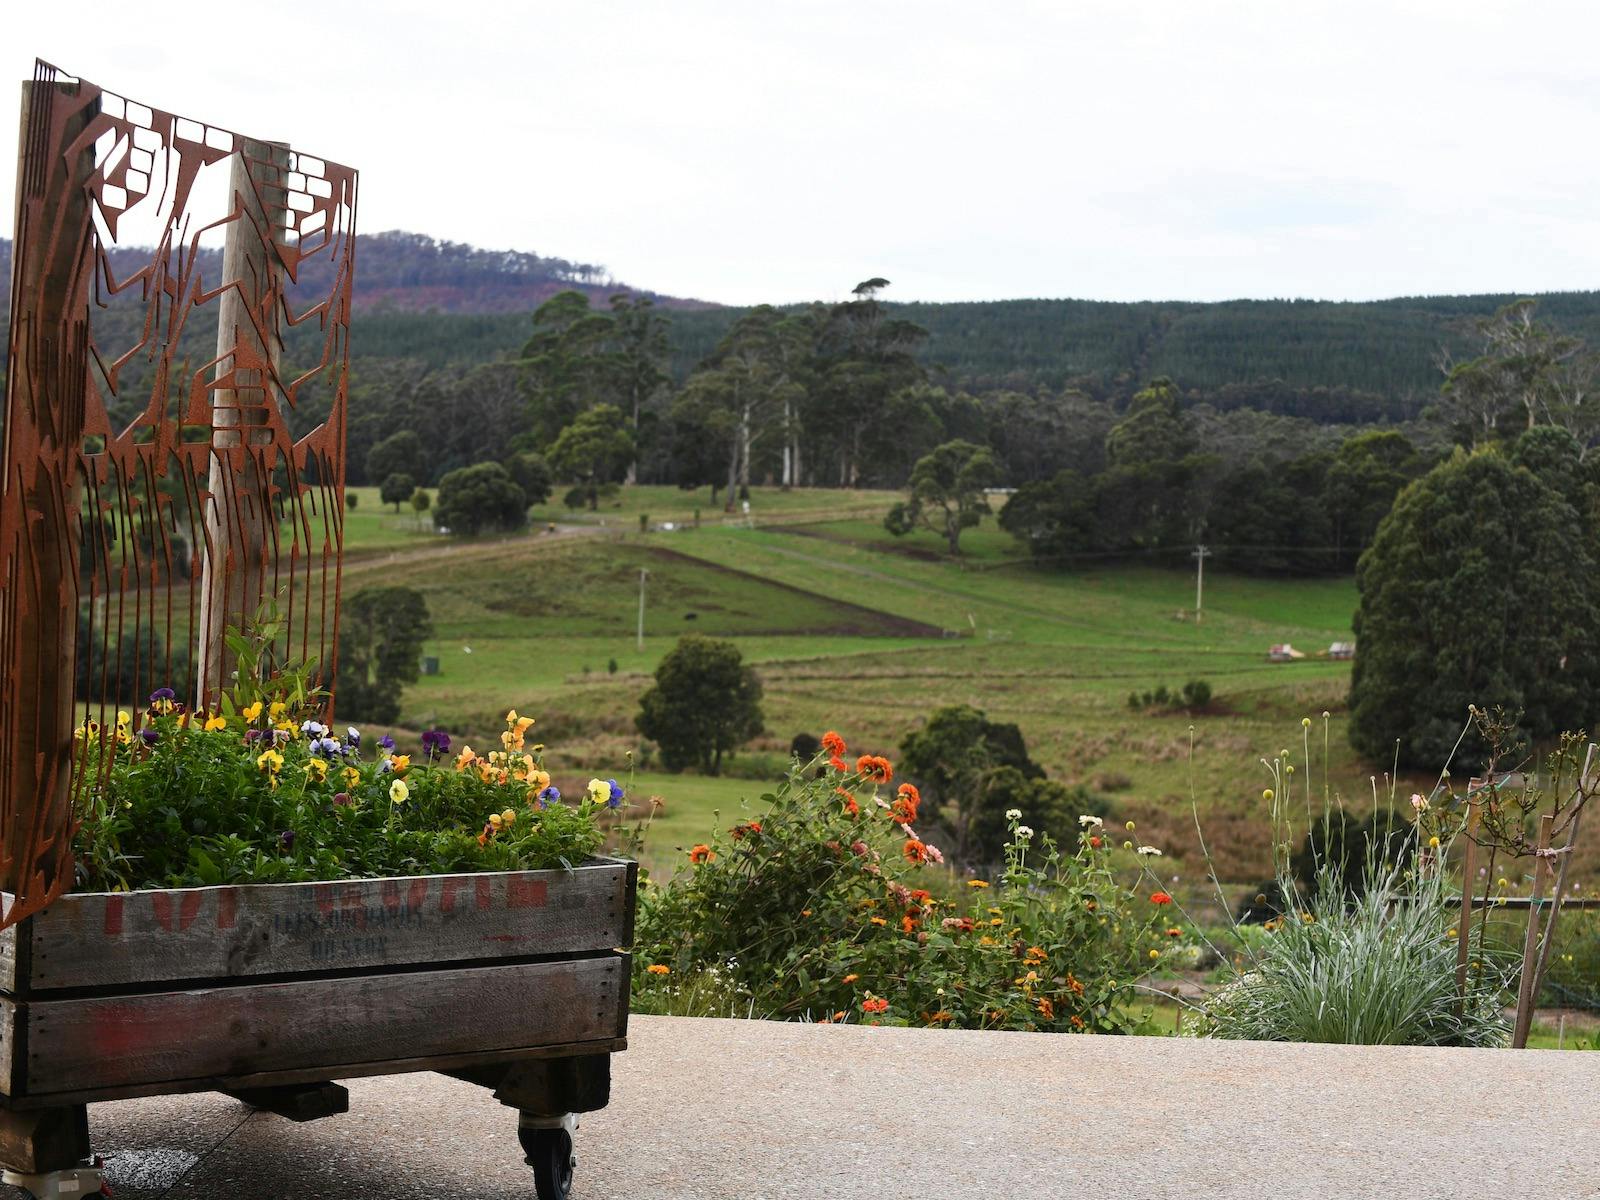 The view at Fork it Farm